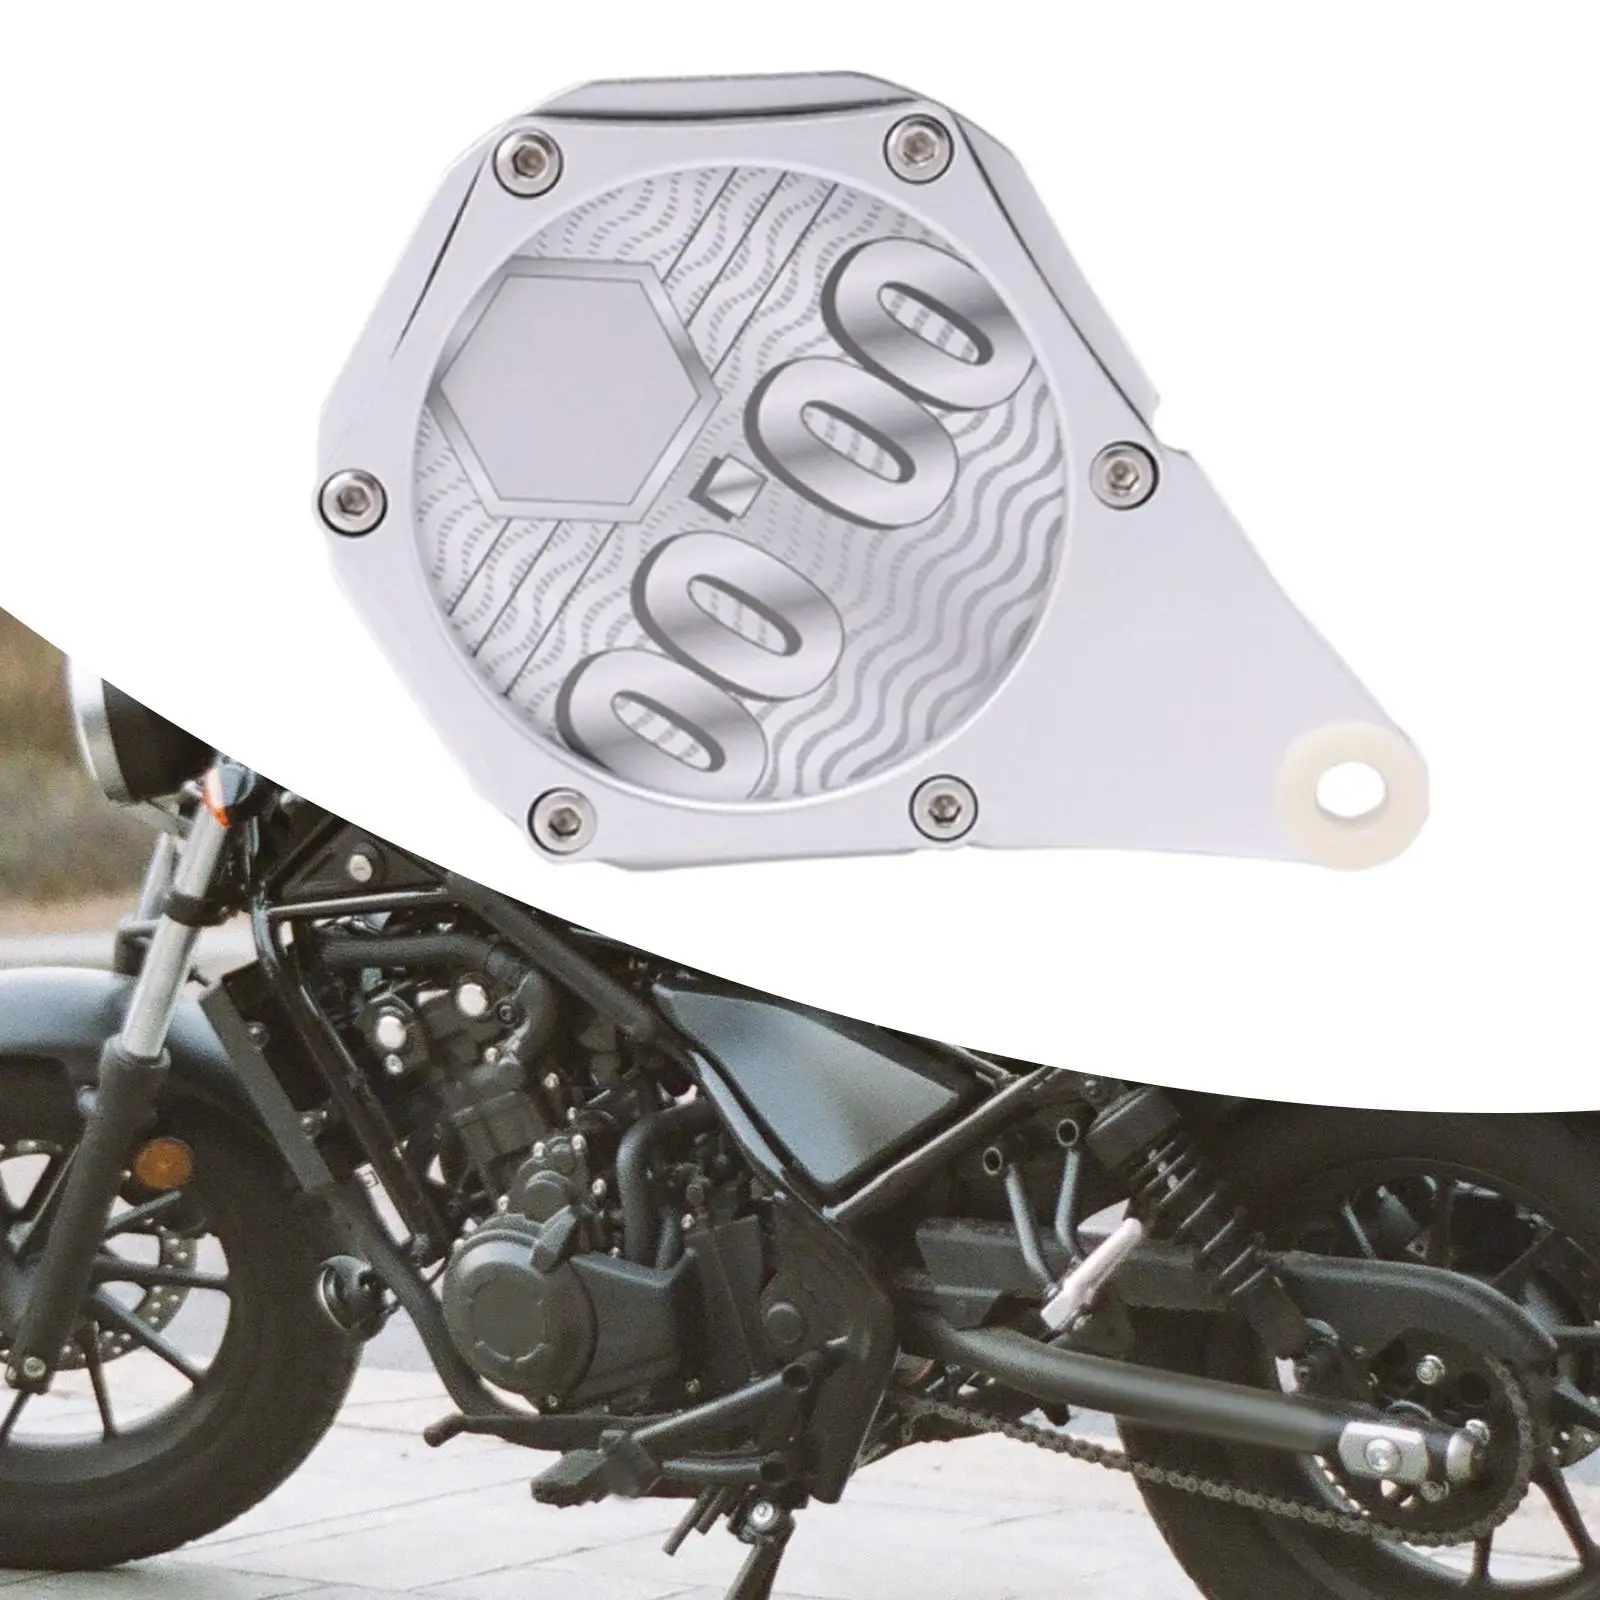 Tax Disc Plate Motorbike Tax Disc Holder for Motorcycle Easy to Install